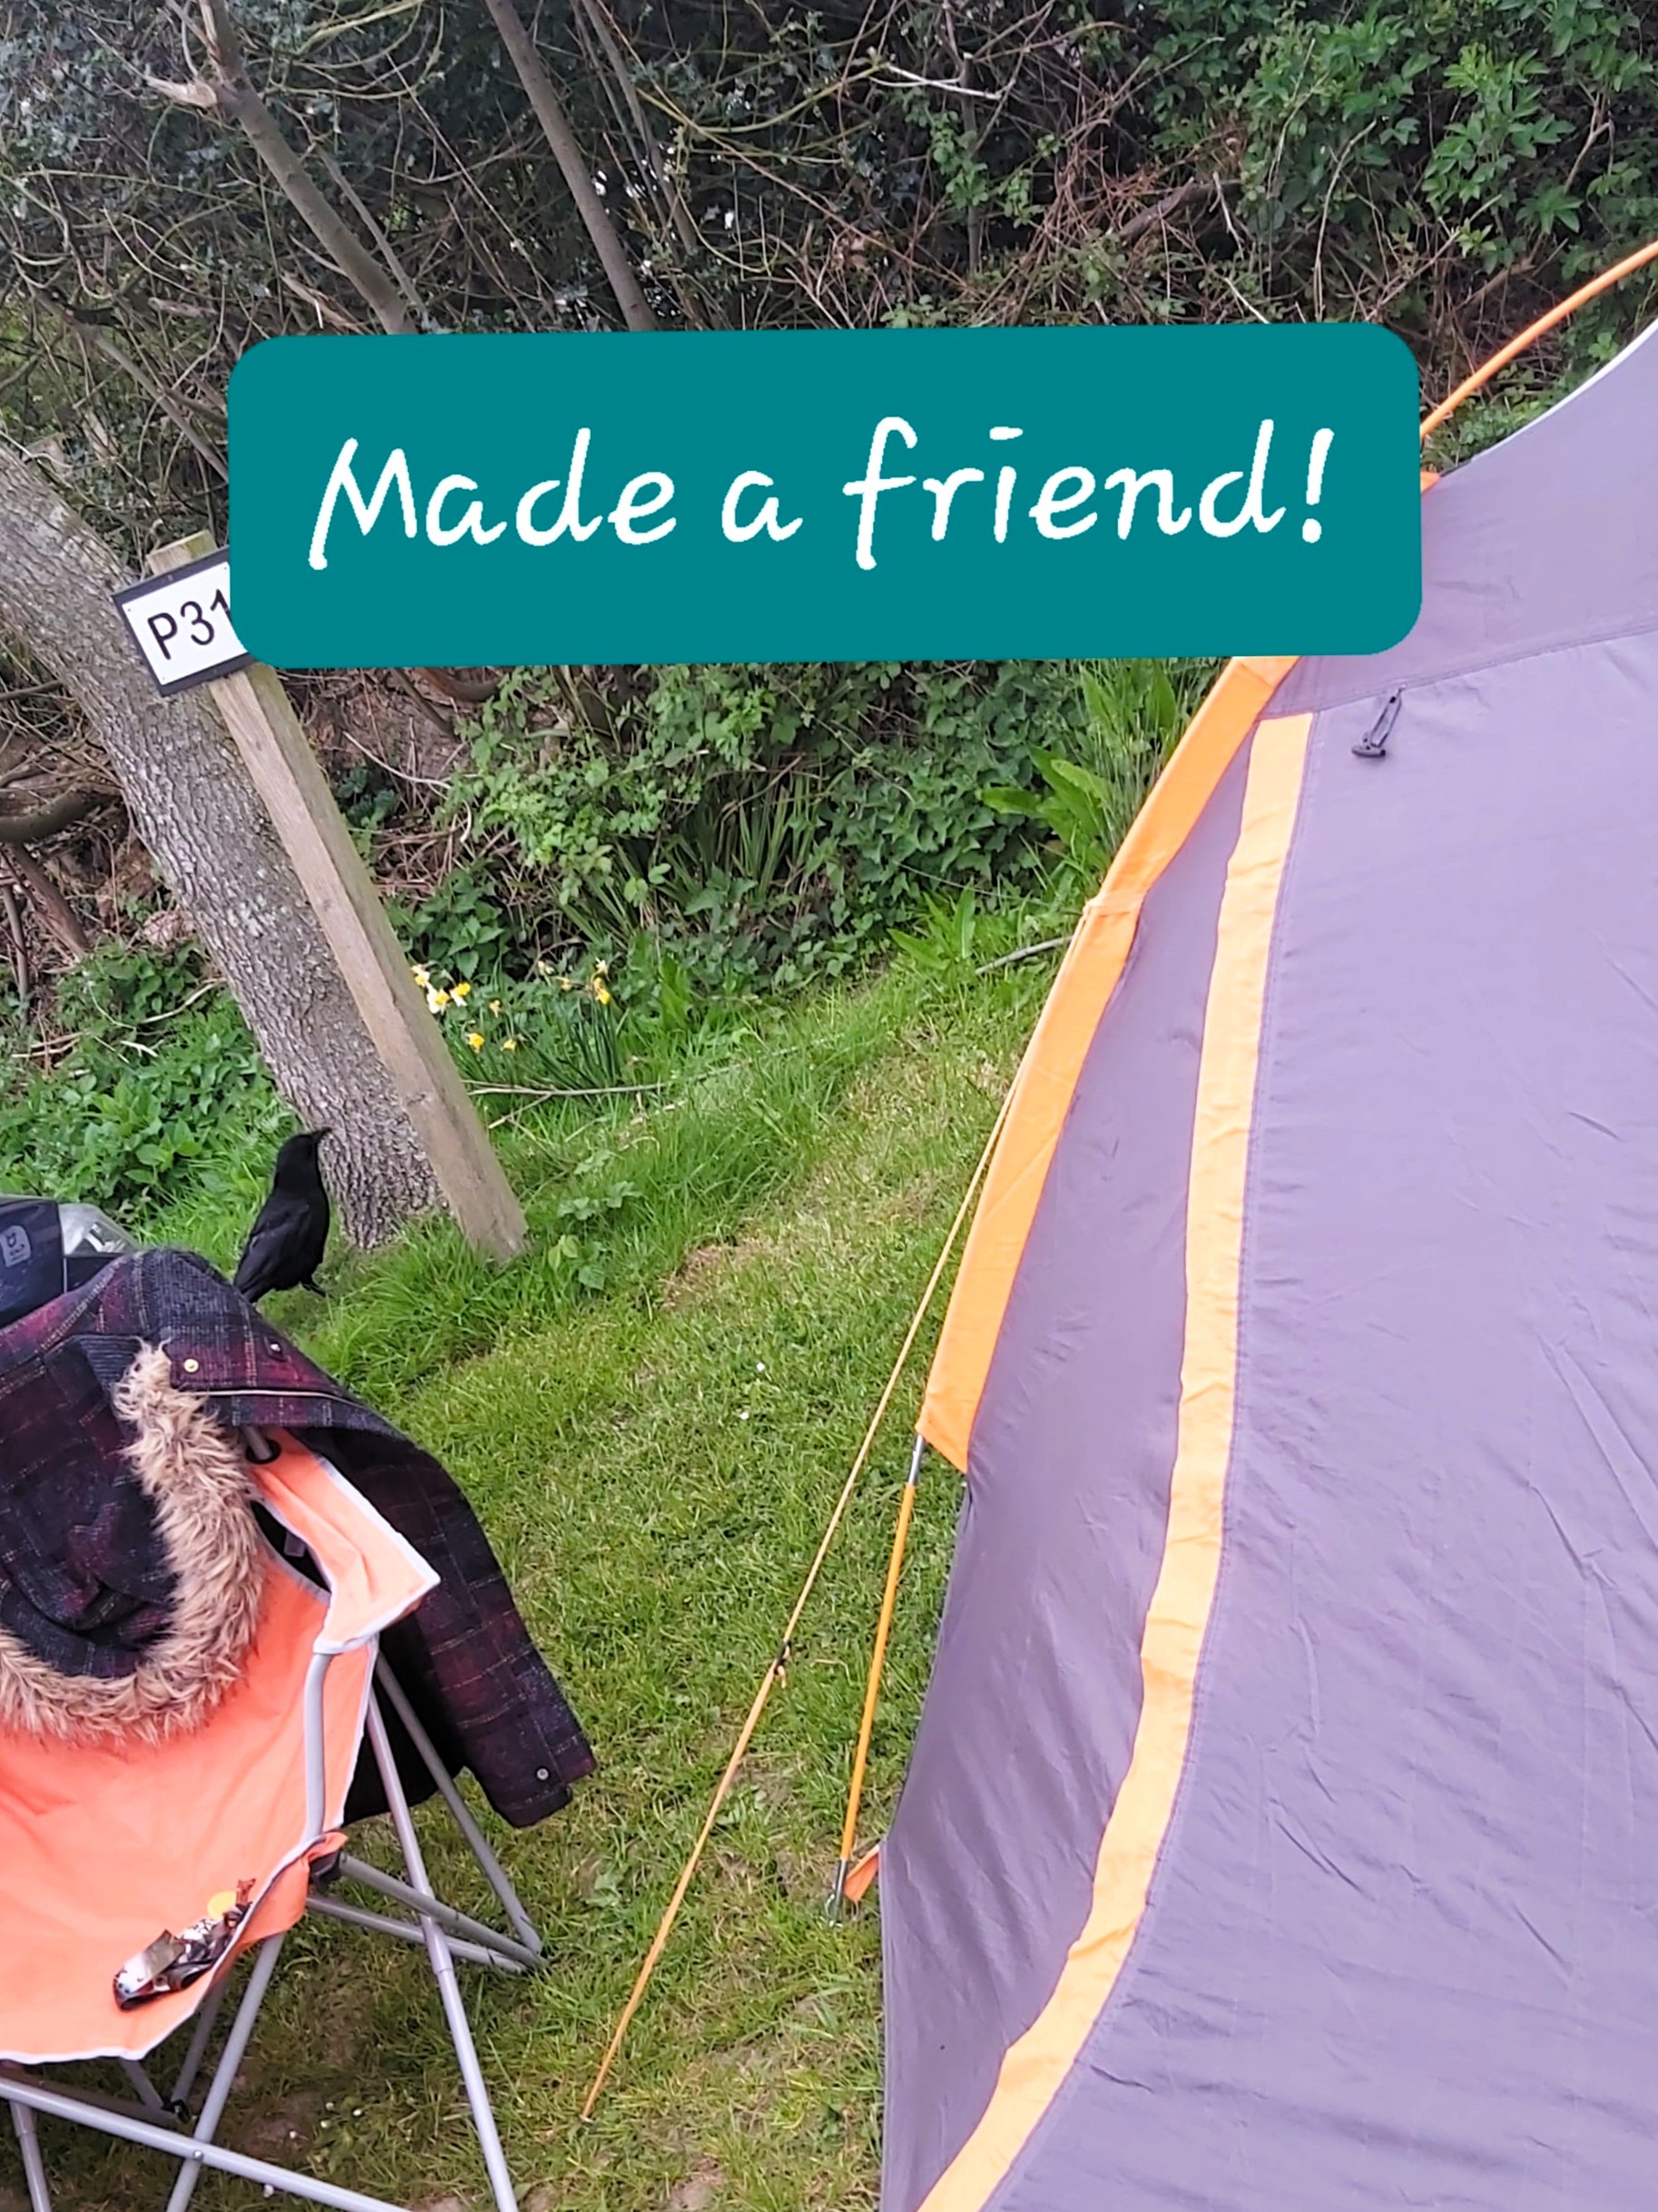 A crow next to a tent with a comment "Made a friend!" at Norden Farm Campsite, Dorset, England